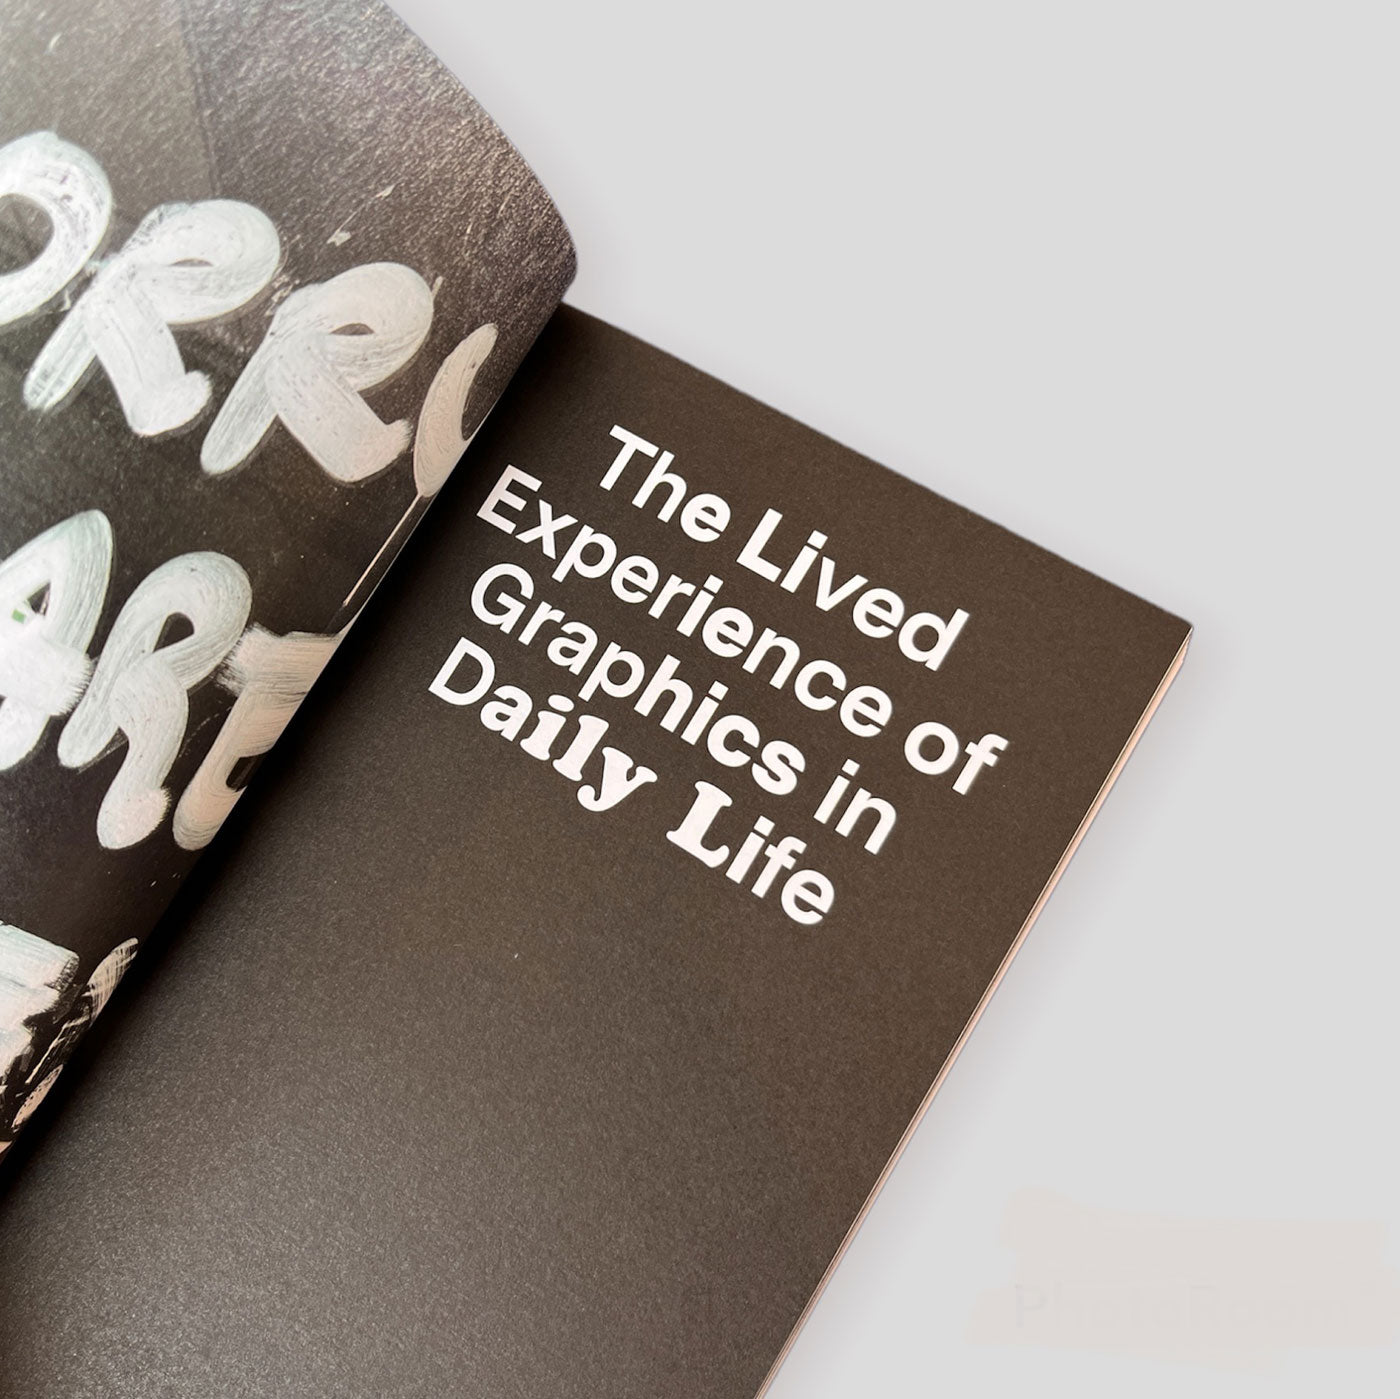 Graphic Events , A Realist Account of Graphic Design | Nick Deakin & James Dyer